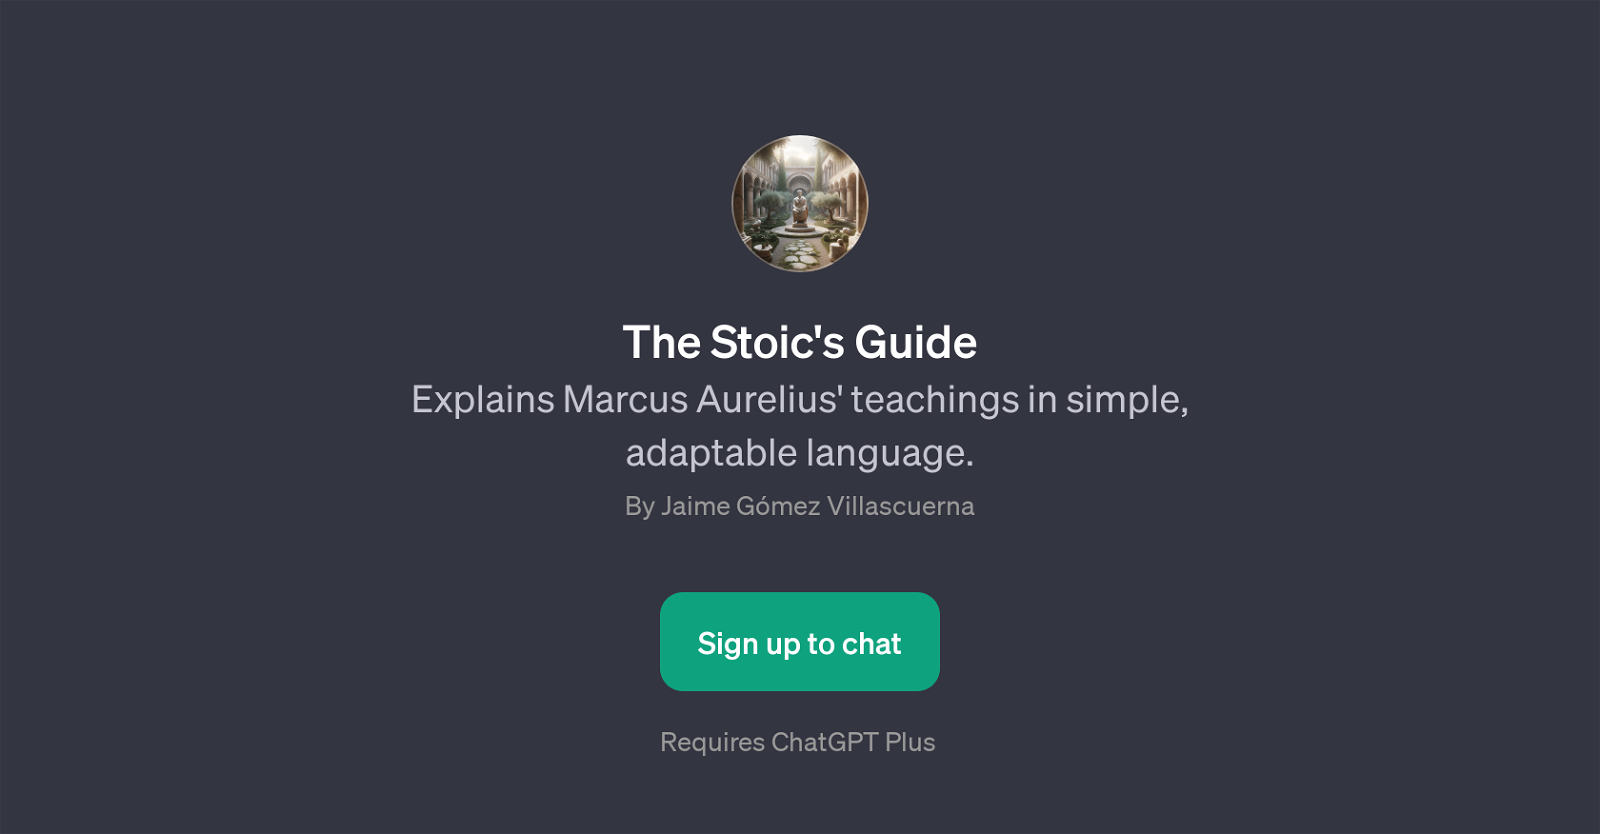 The Stoic's Guide website